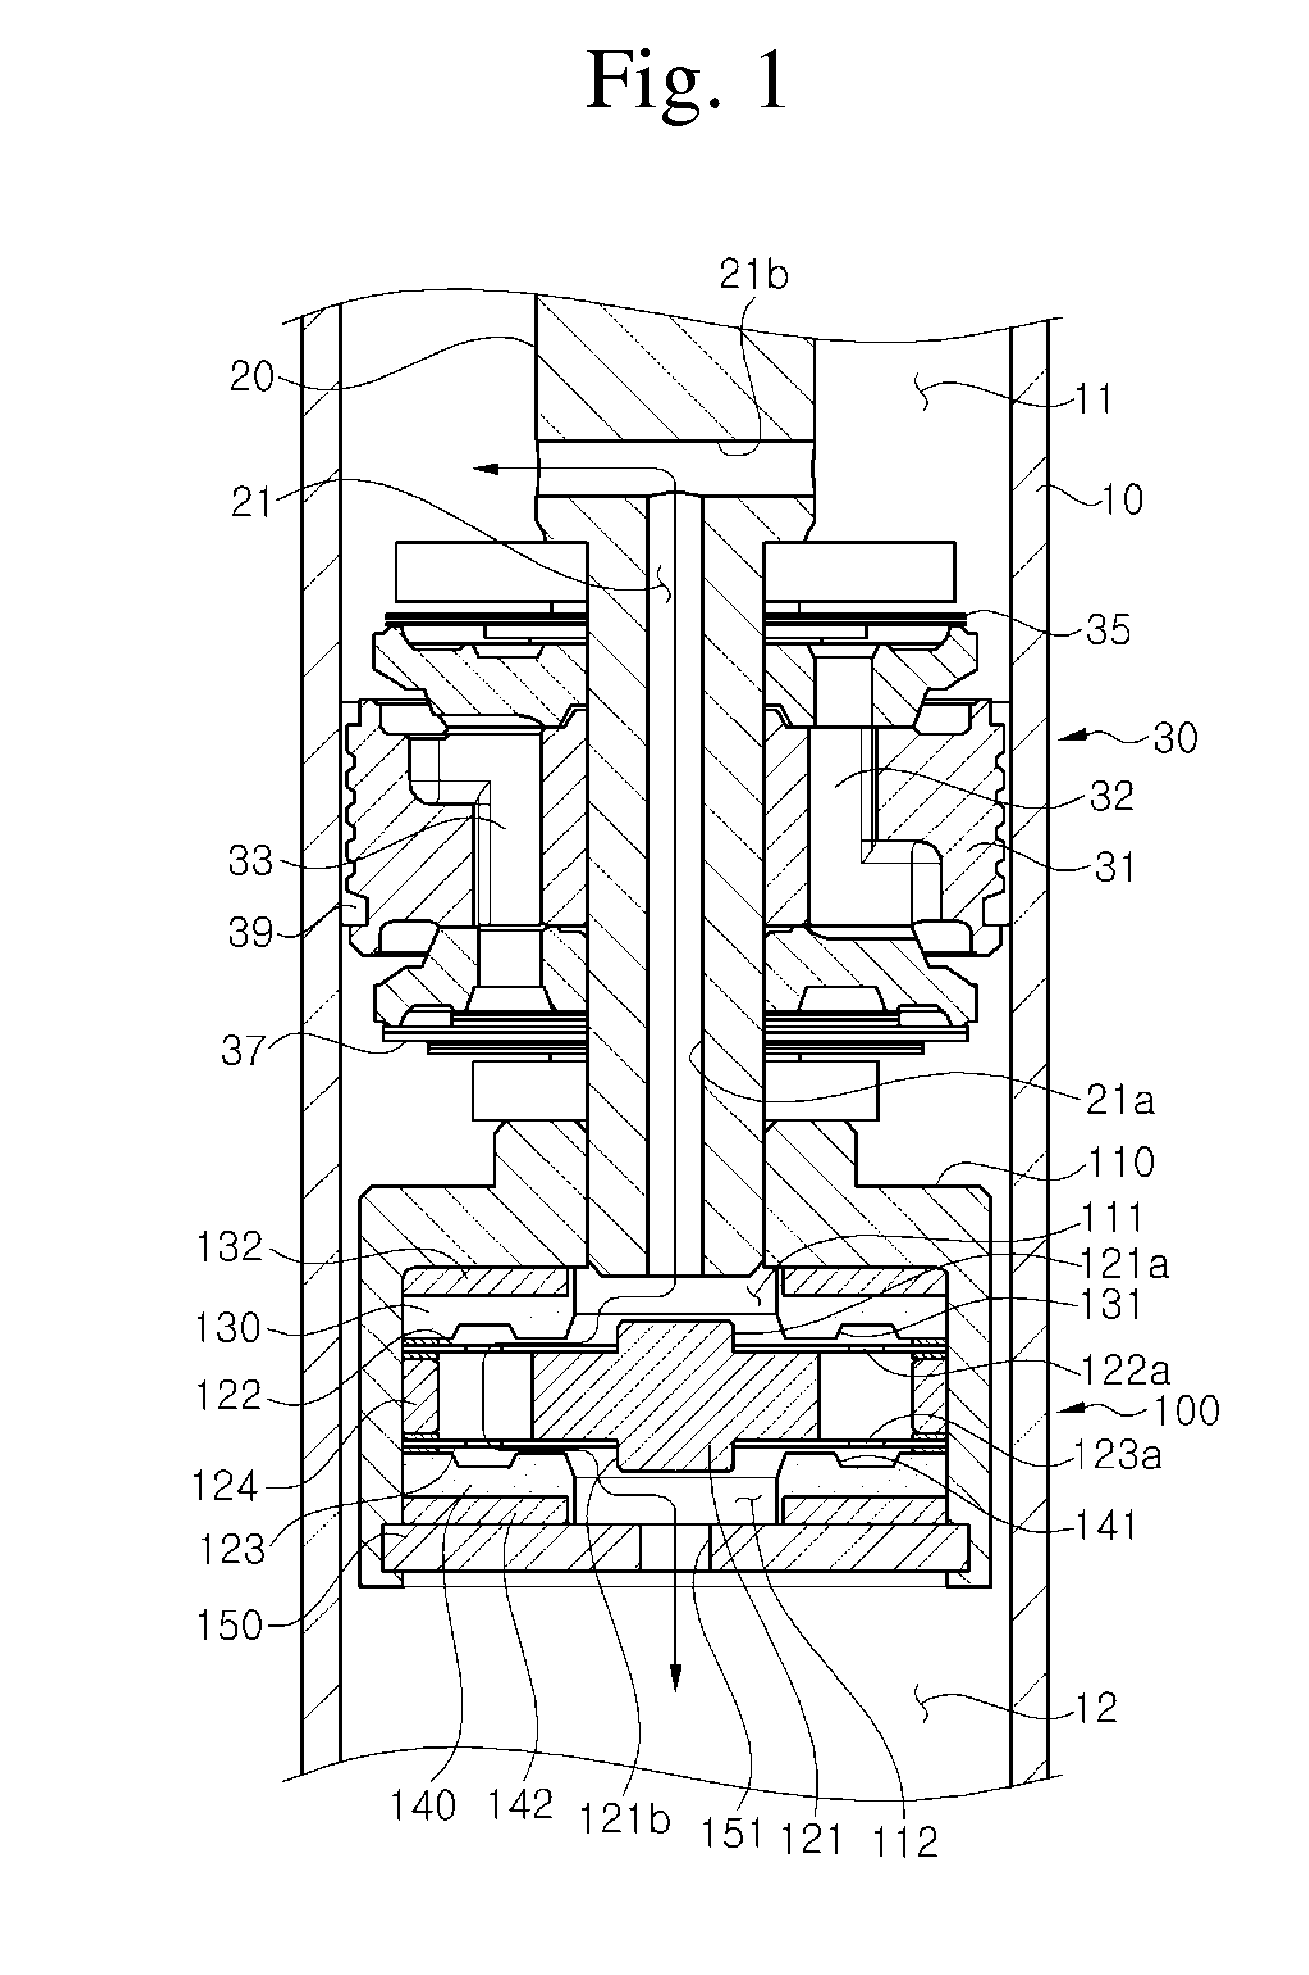 Frequency-sensitive shock absorber